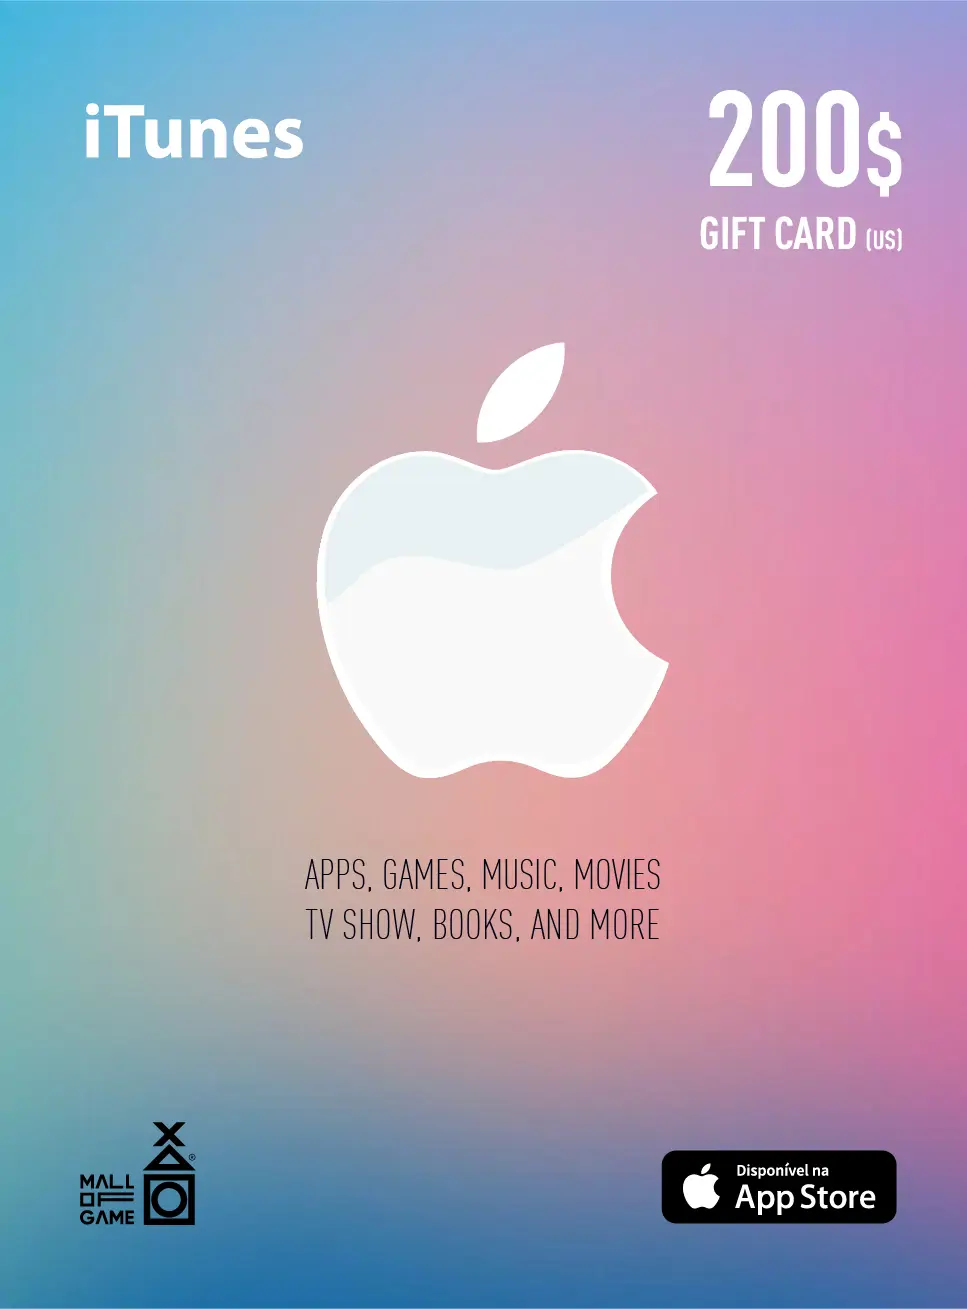  iTunes USD200 Gift Card (US)